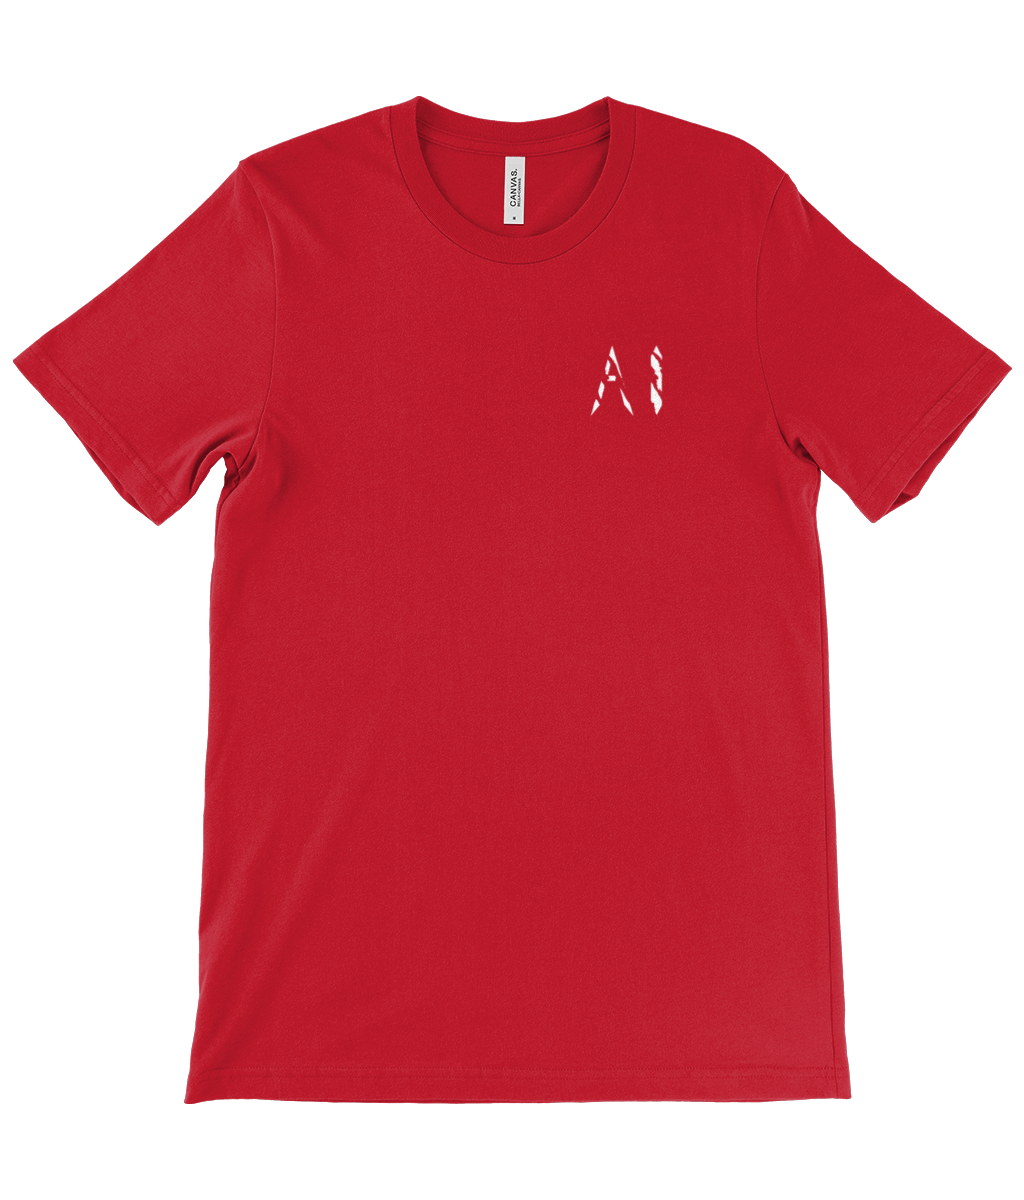 Mens Red Casual T-Shirt with white logo on the left chest